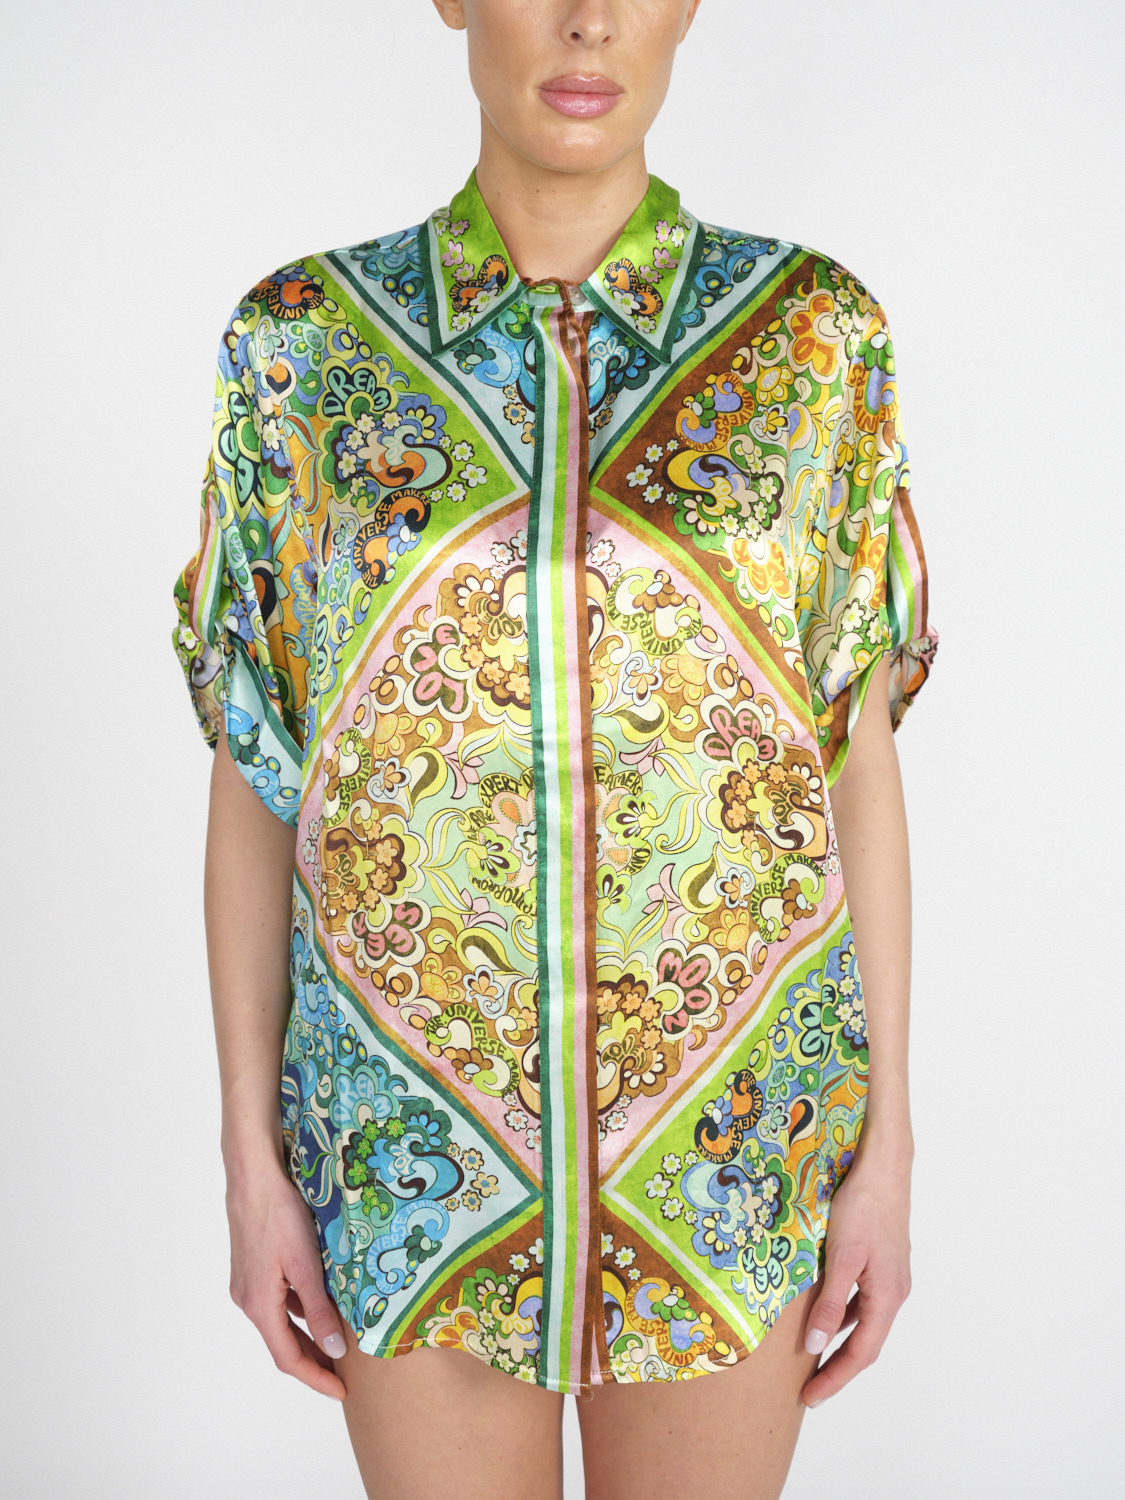 Alemais Dreamer Shirt - Short-sleeved blouse with floral print  multi 38